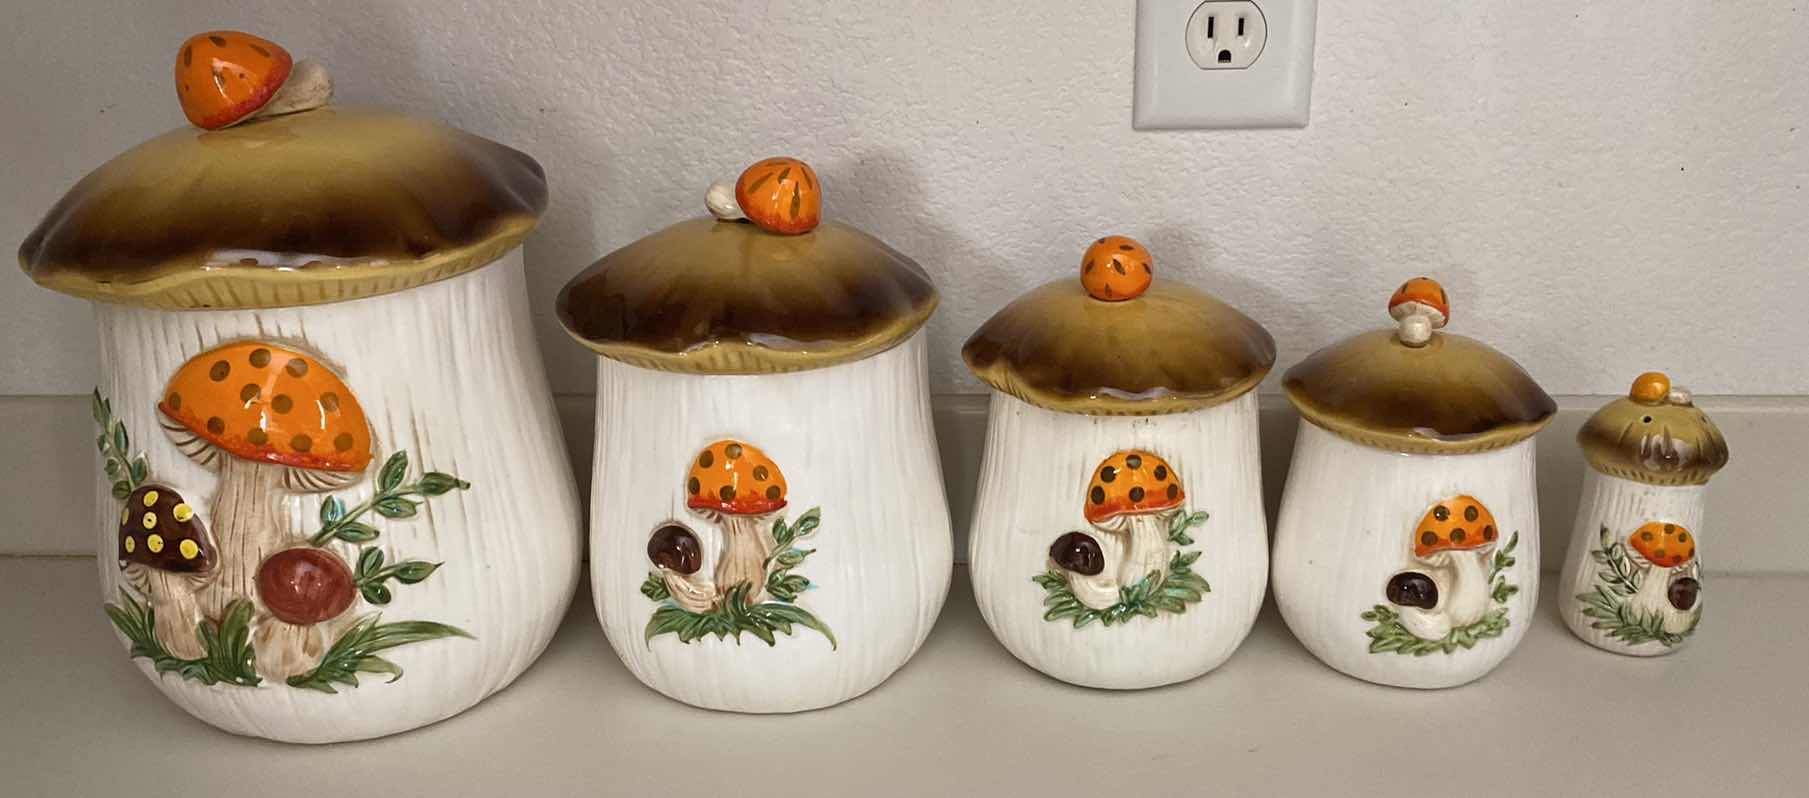 Photo 1 of VINTAGE 1996 CERAMIC MUSHROOM CANISTERS FROM SEARS MADE IN JAPAN